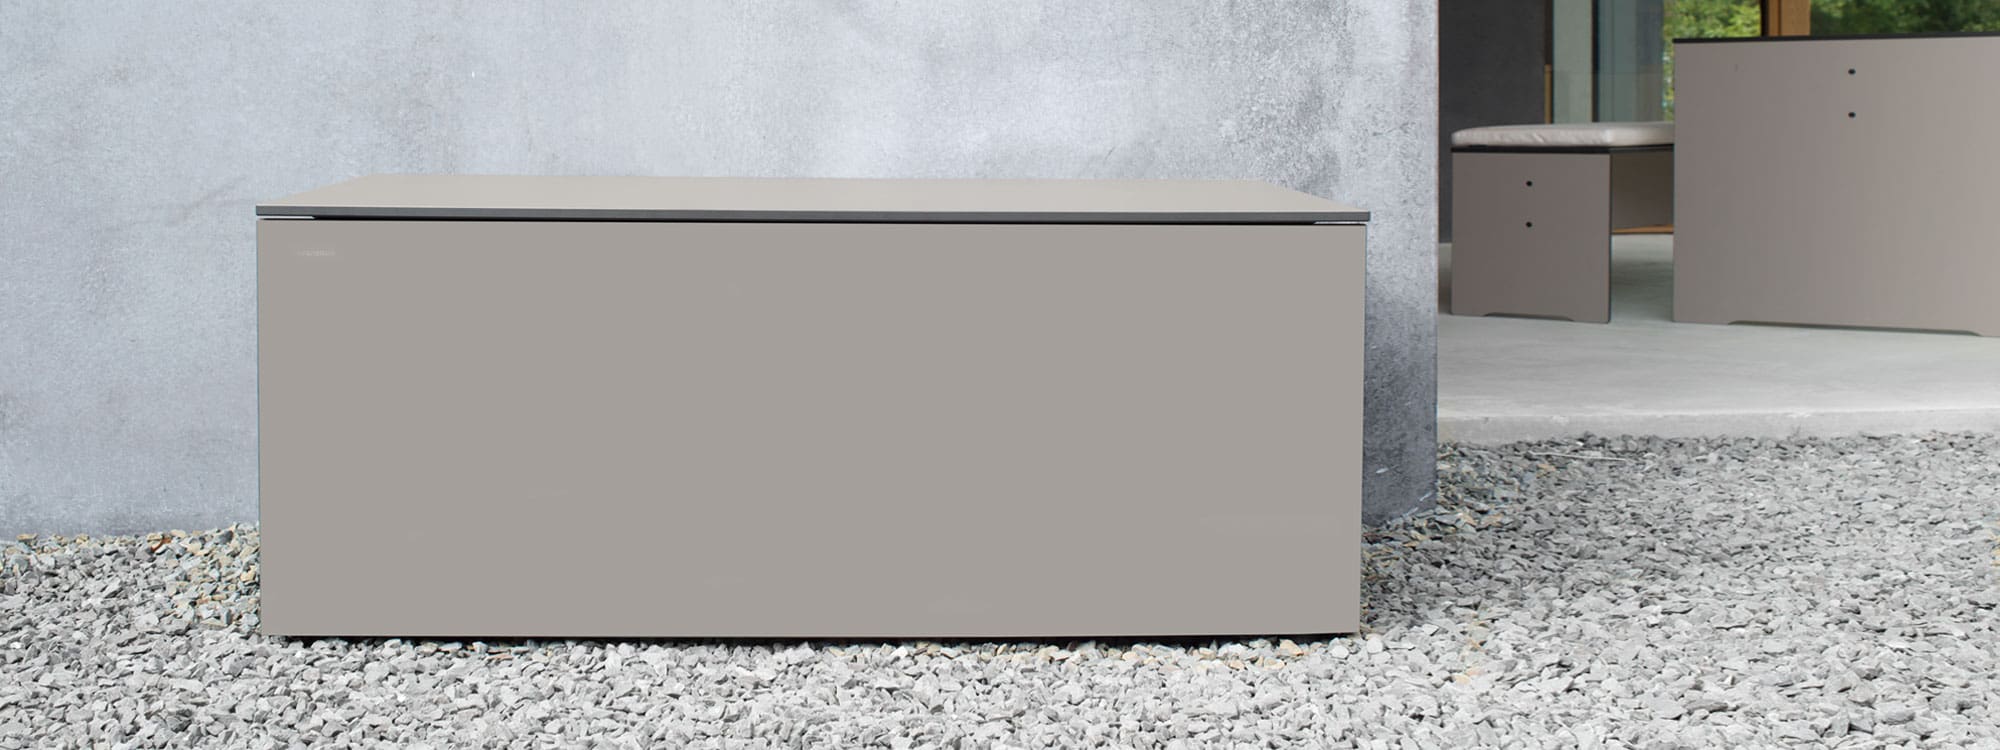 Image of Conmoto El Pecho taupe coloured garden storage box, shown on gravel, with poured concrete wall and Riva HPL furniture in the background